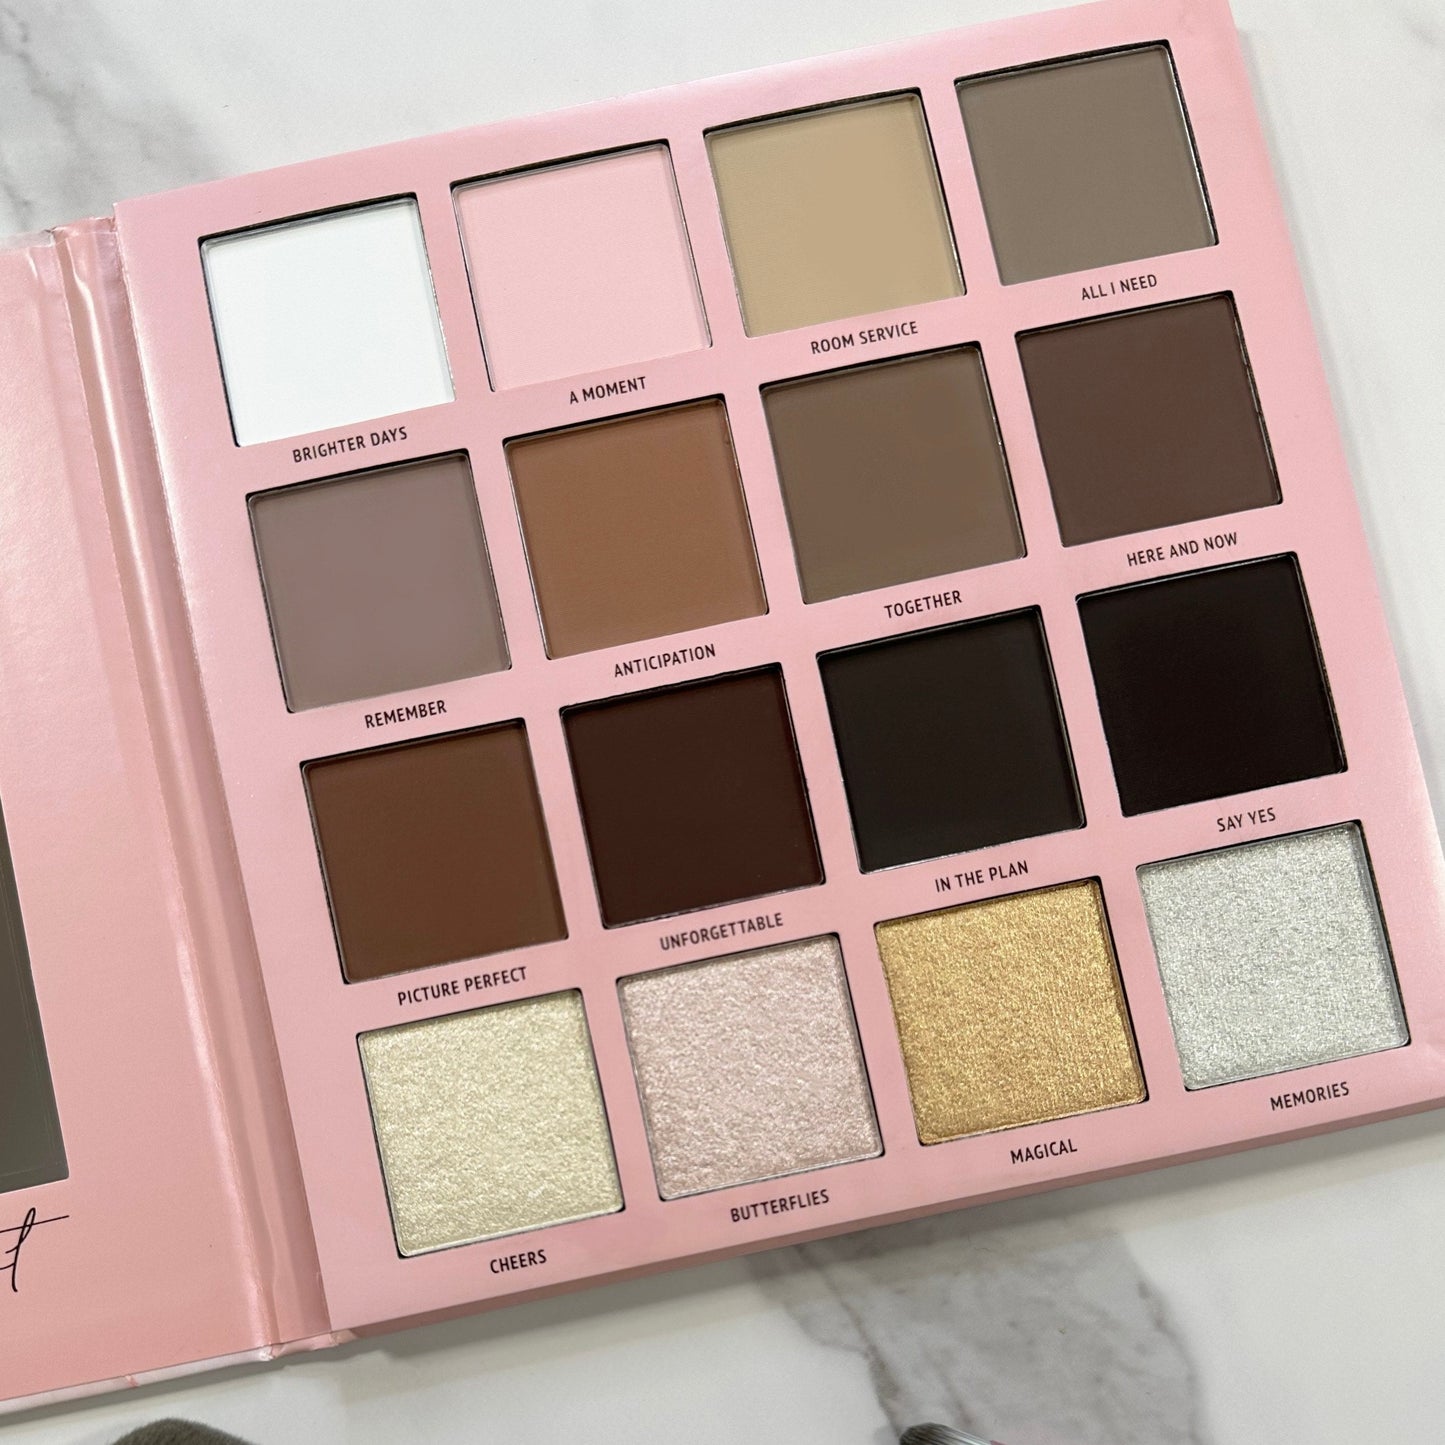 Forget Me Not eyeshadow/face palette